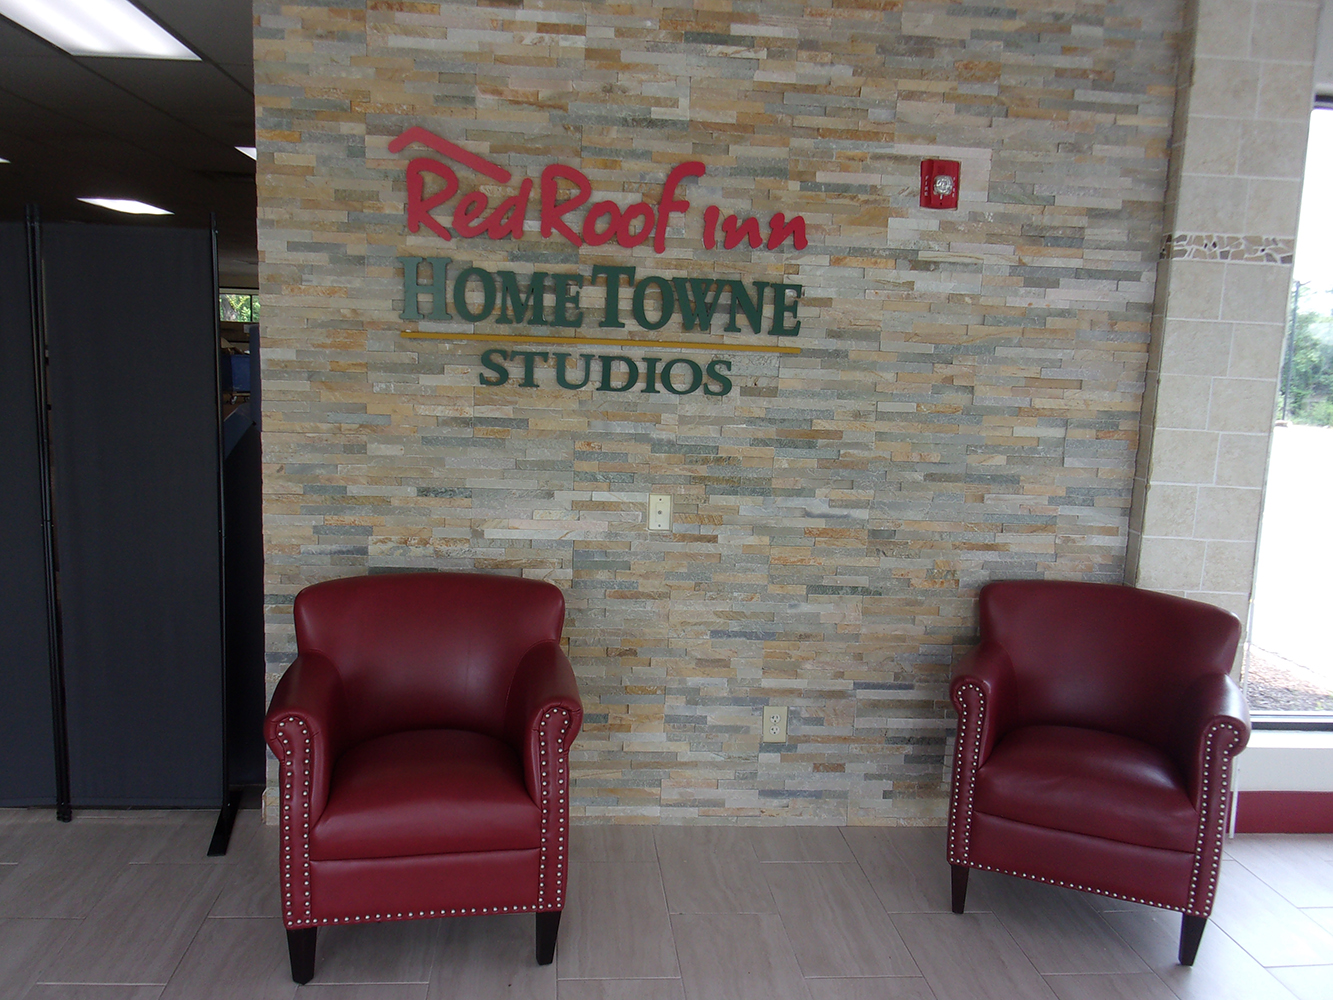 A new dual-brand Red Roof and HomeTowne Studios has opened in Chicago